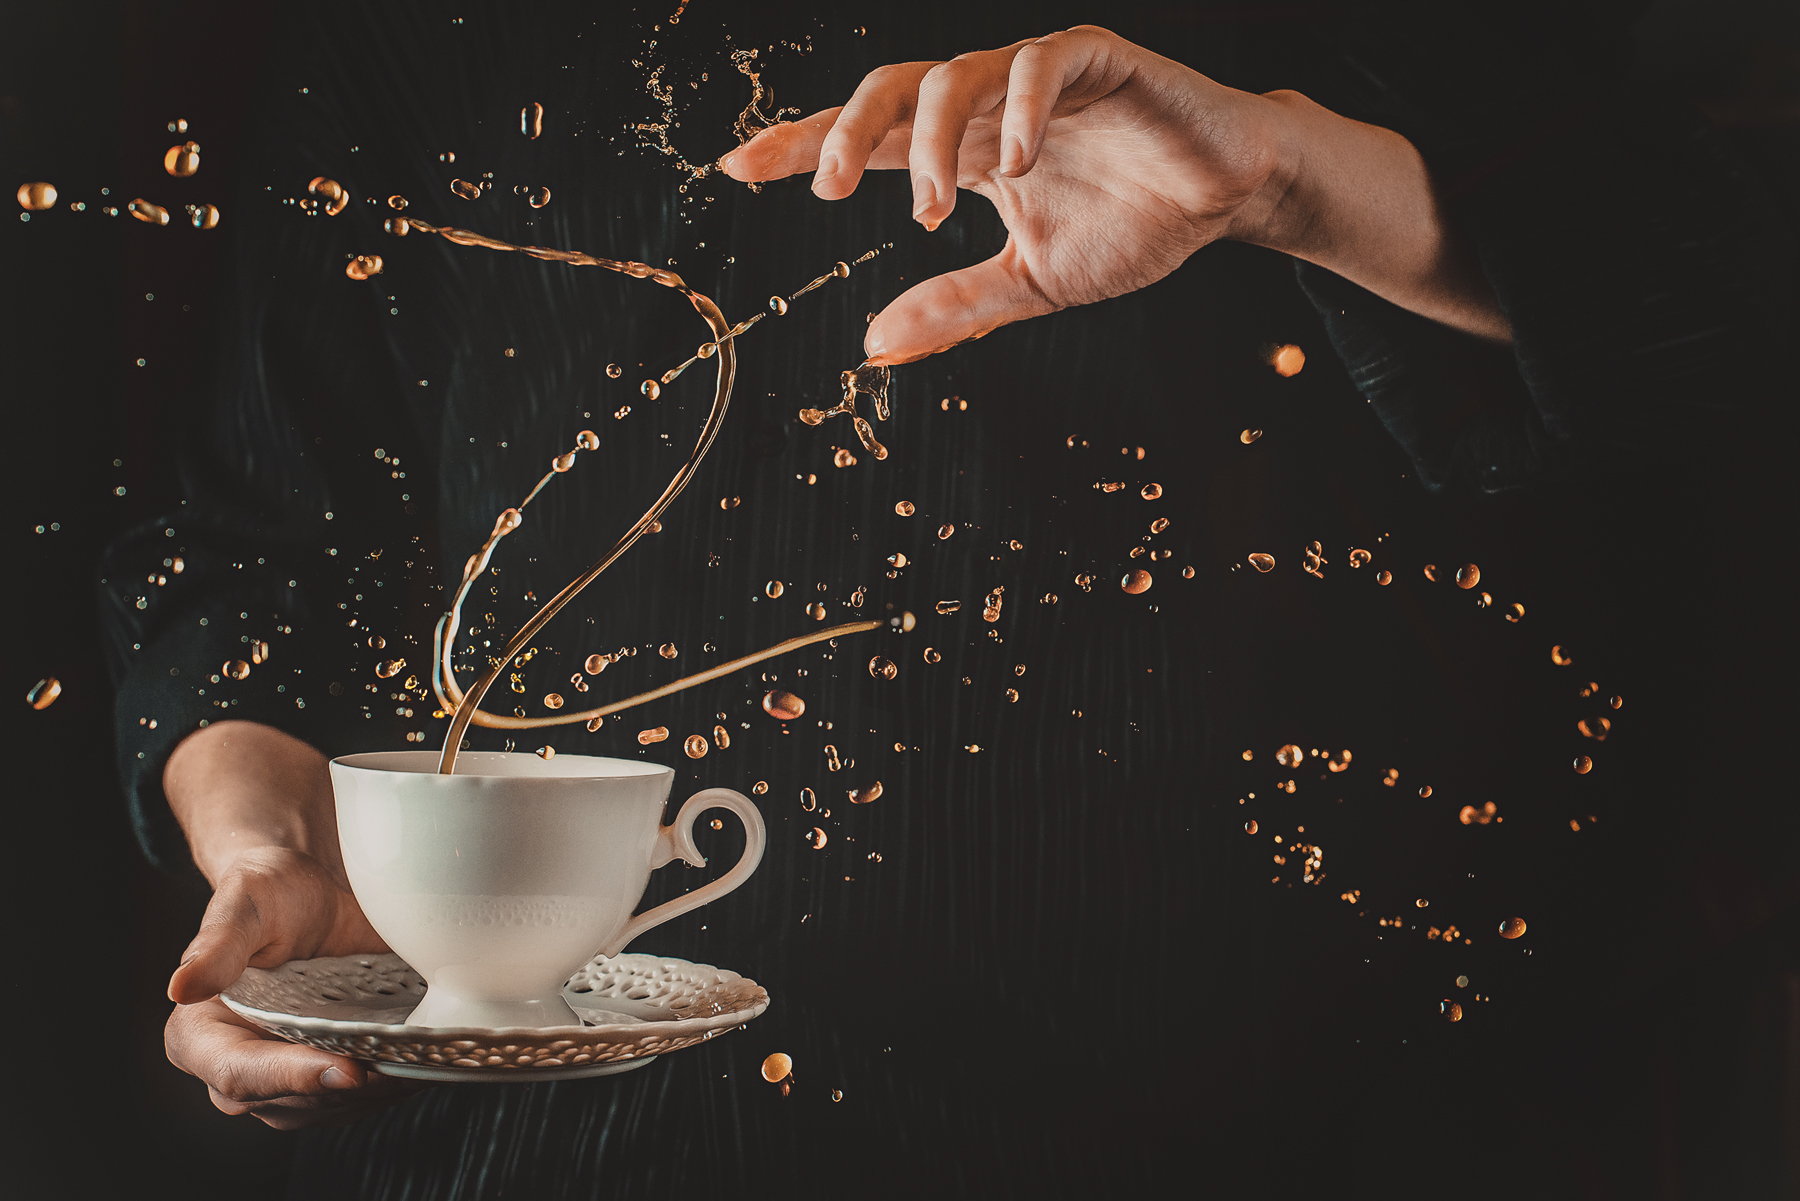 Defying Gravity: How to Shoot 'Twisted' Coffee Splashes